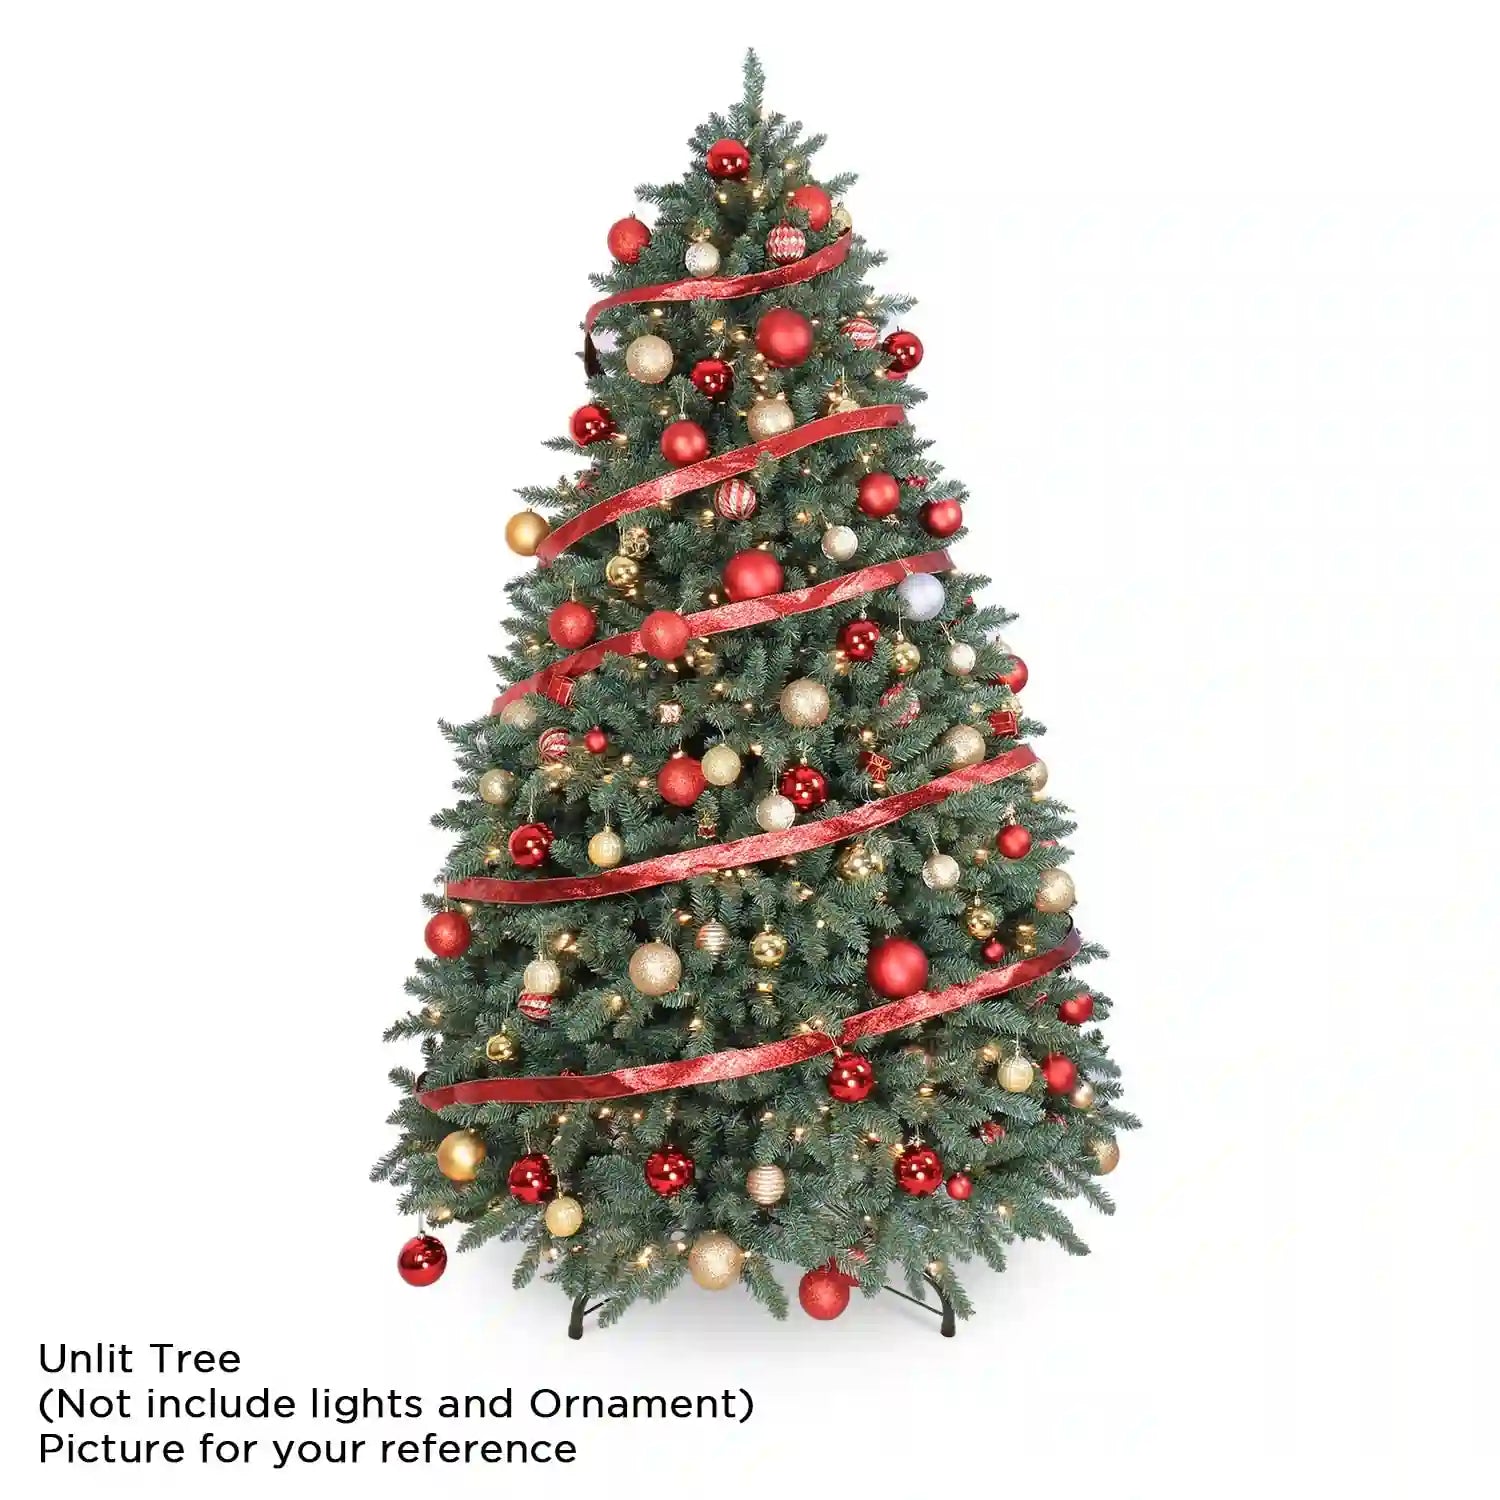 Our OasisCraft Christmas trees are available in a variety of sizes#size_10FT